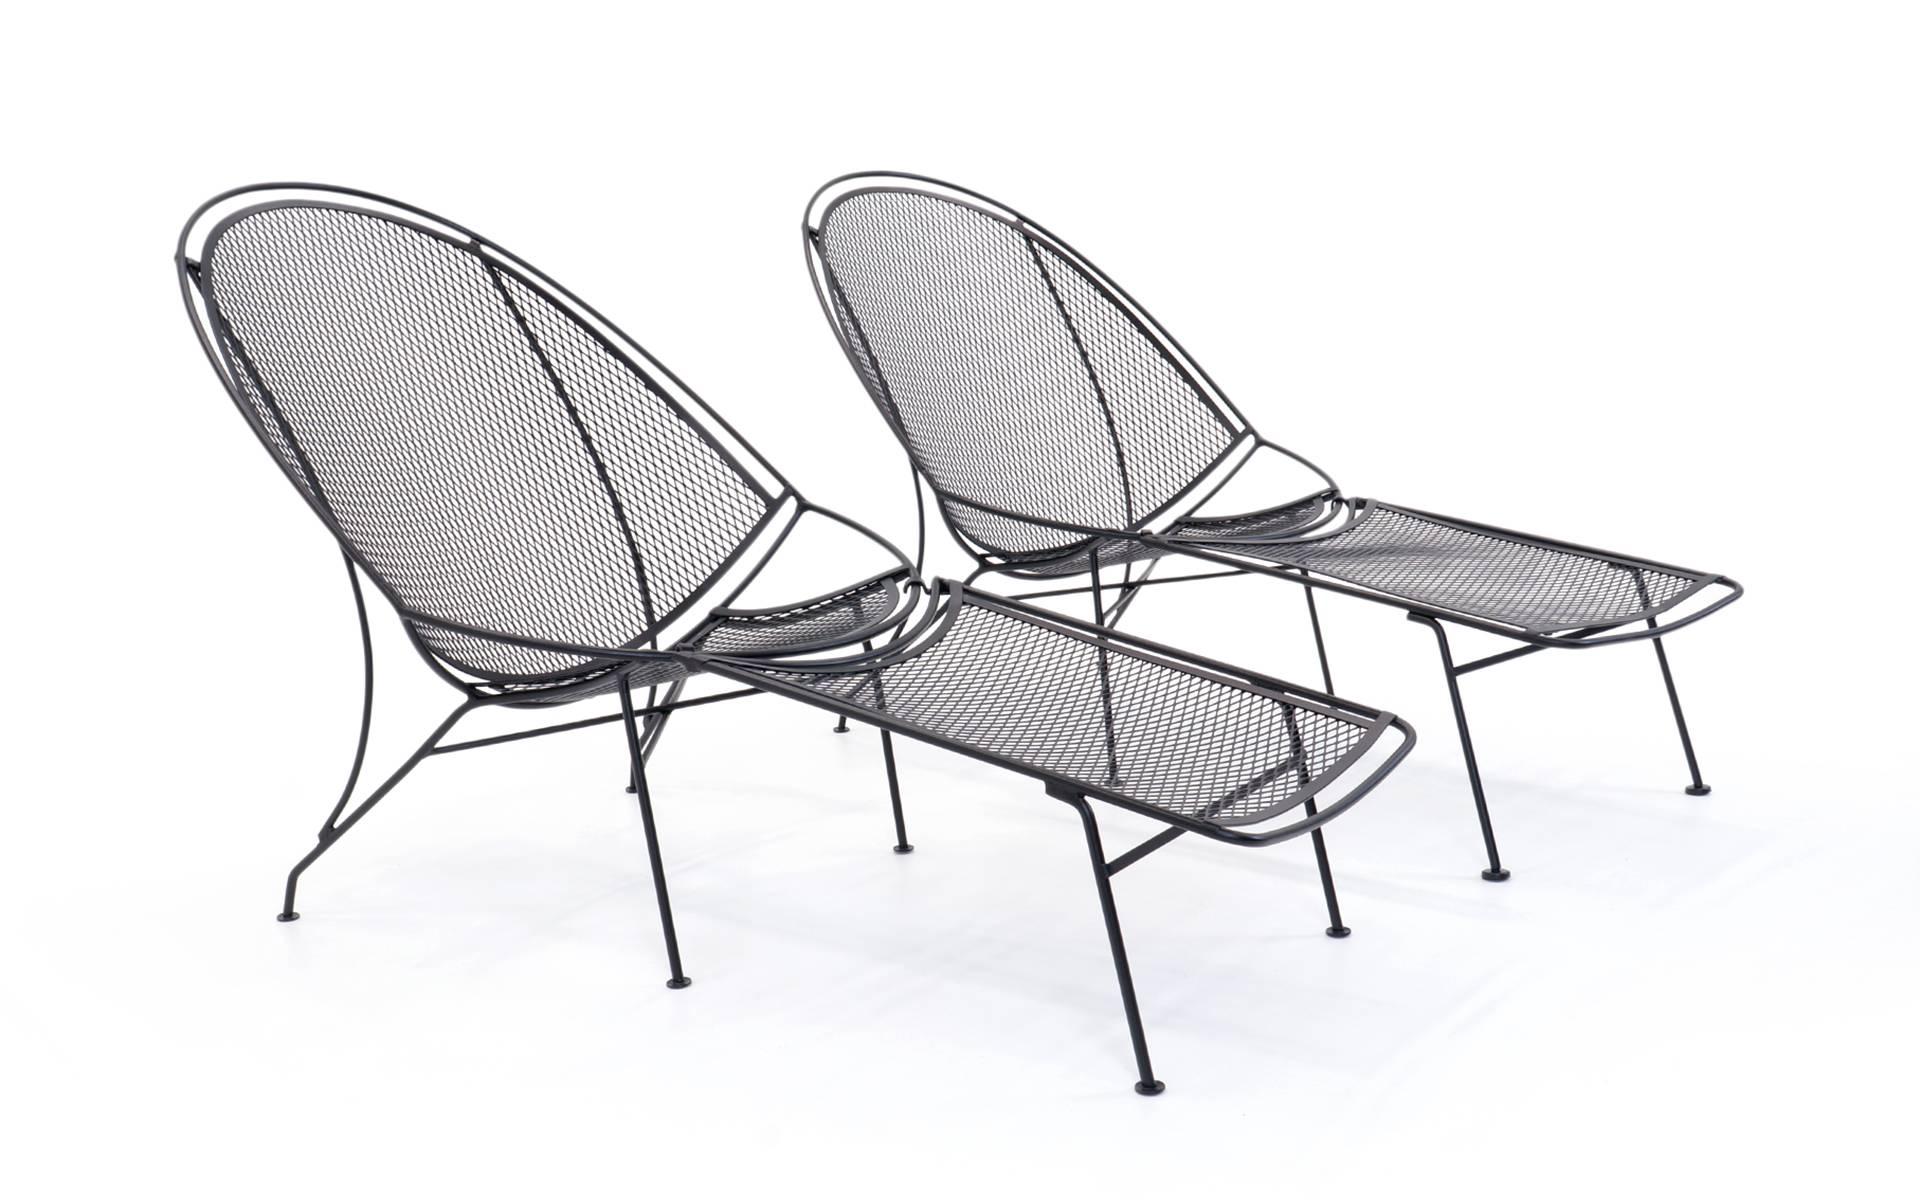 Pair of rare and desirable high back lounge chairs with removable footrest / ottoman, designed and made by the John Salterini Company, Brooklyn NY, 1965. These have been professionally media blasted and powder coated in a satin, slightly textured